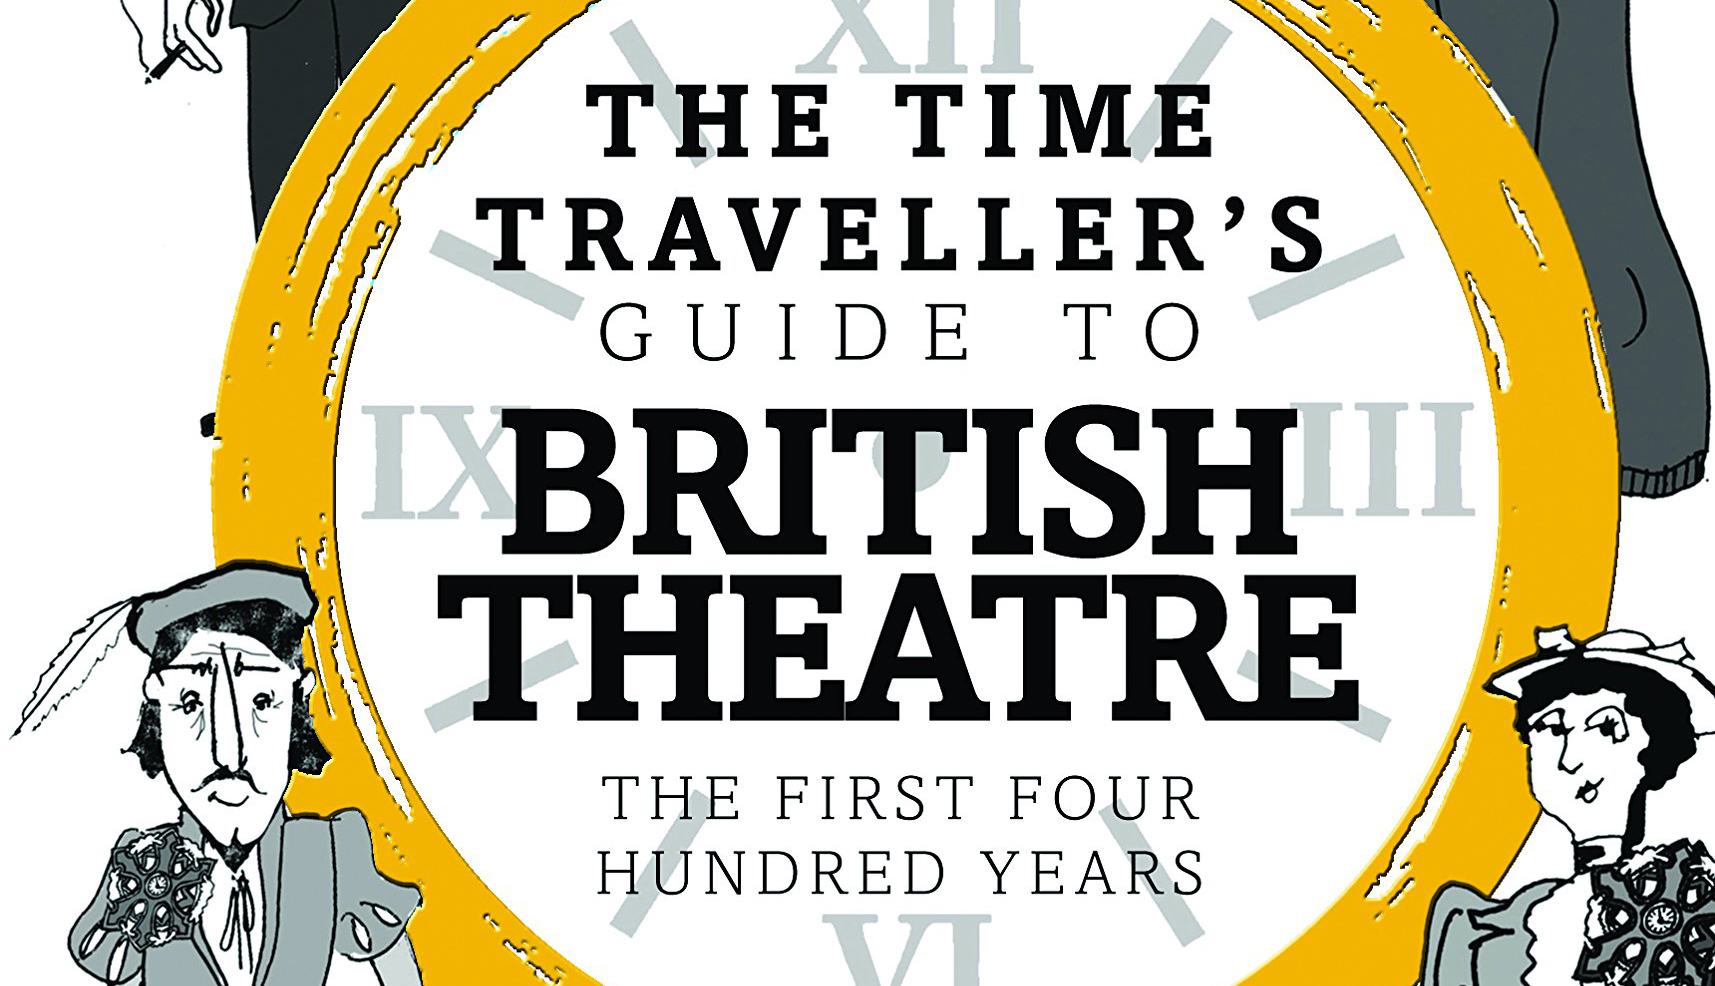 Draak Aquarium kroeg The Time Traveller's Guide to British Theatre: An Extract - Aleks Sierz